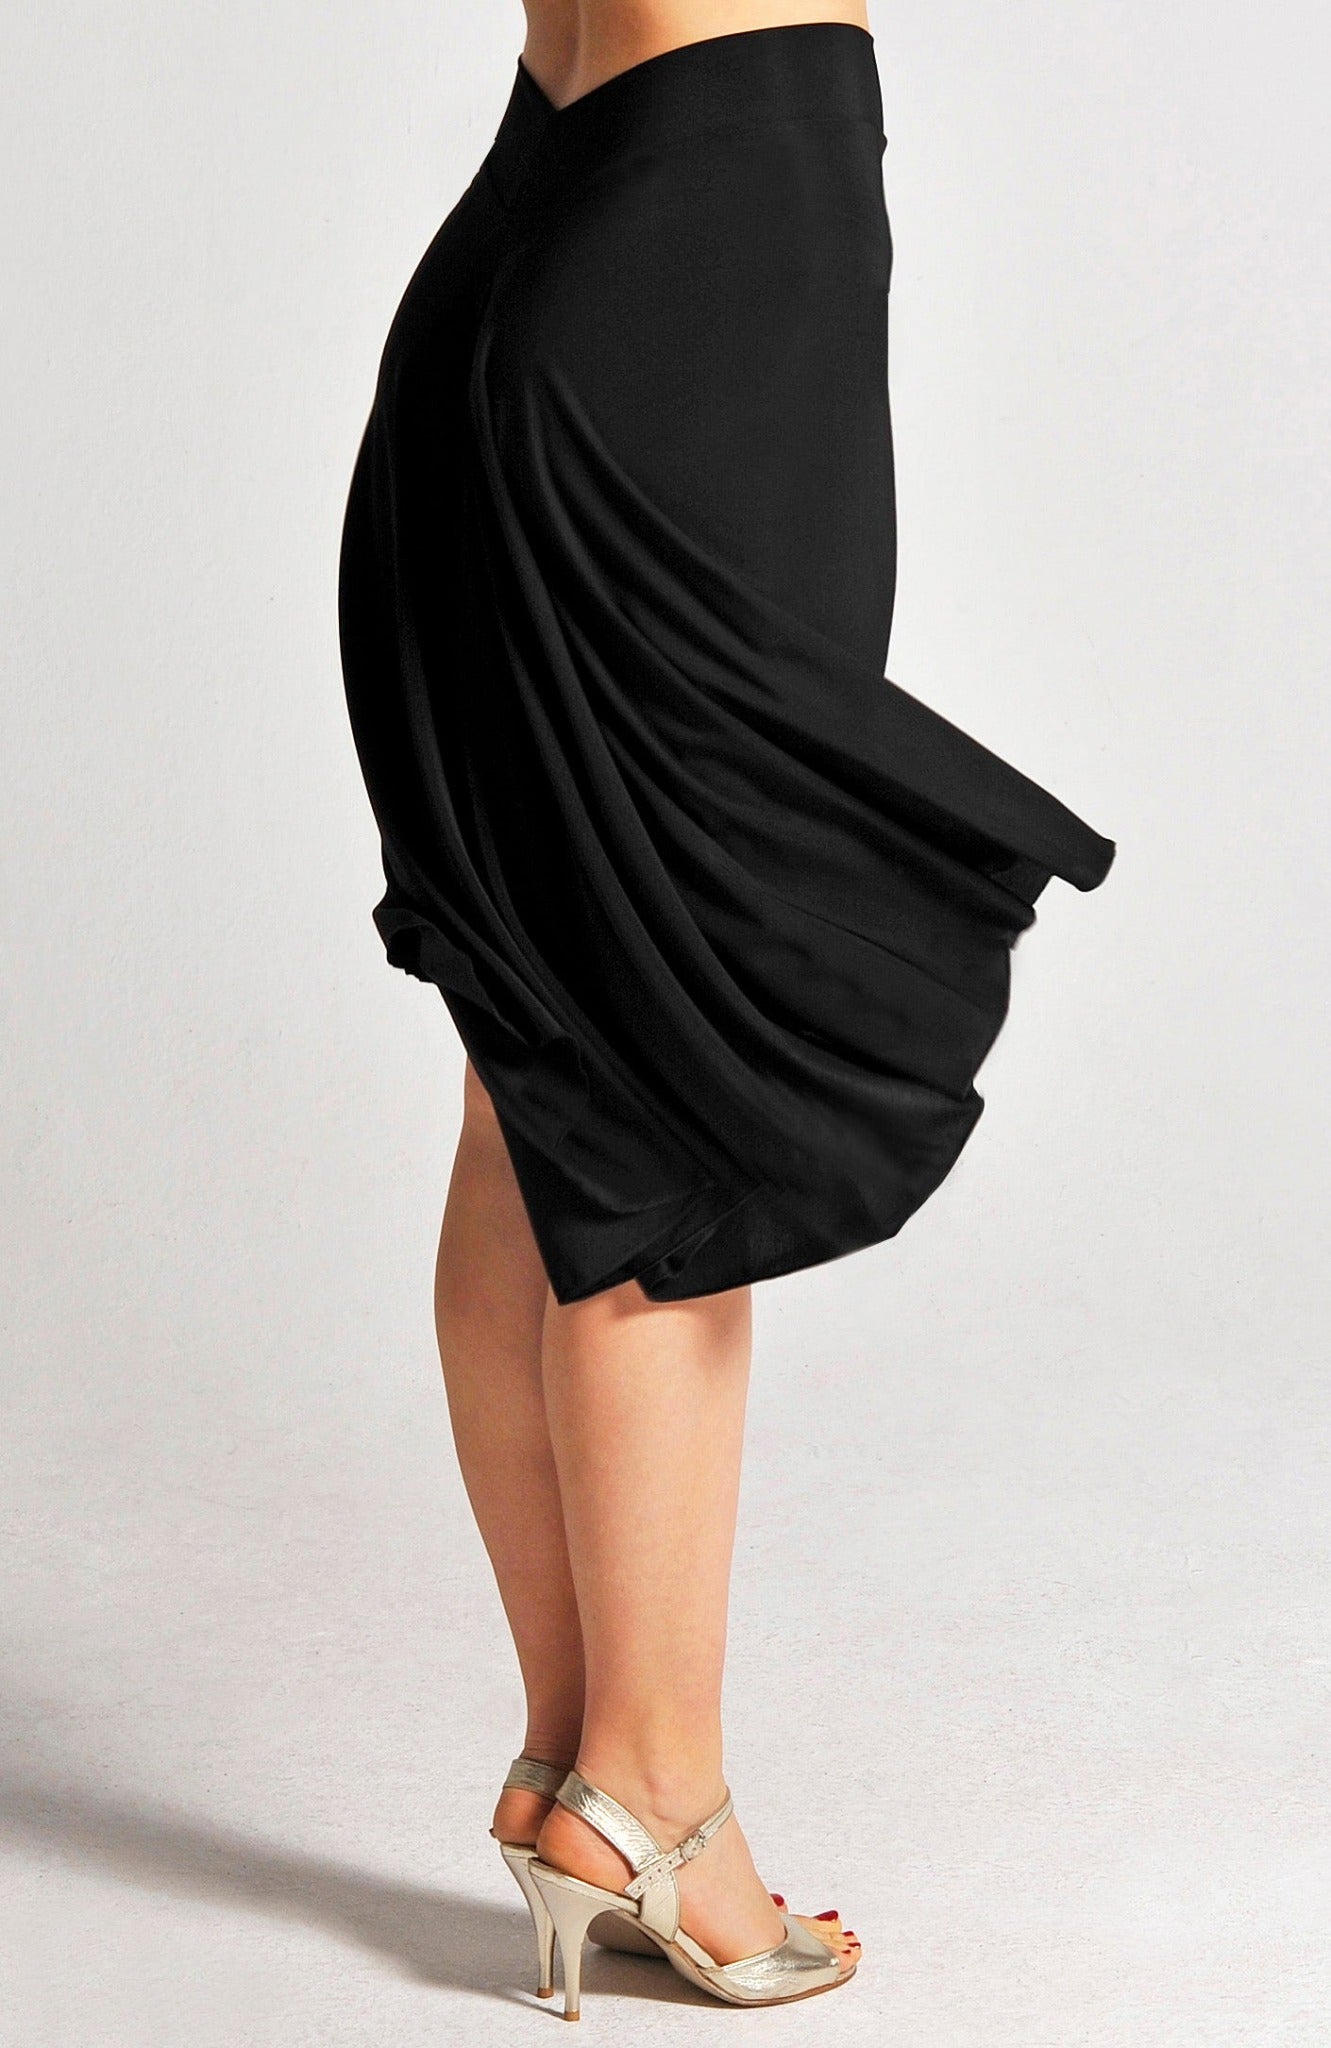 tango skirt with fishtail in black